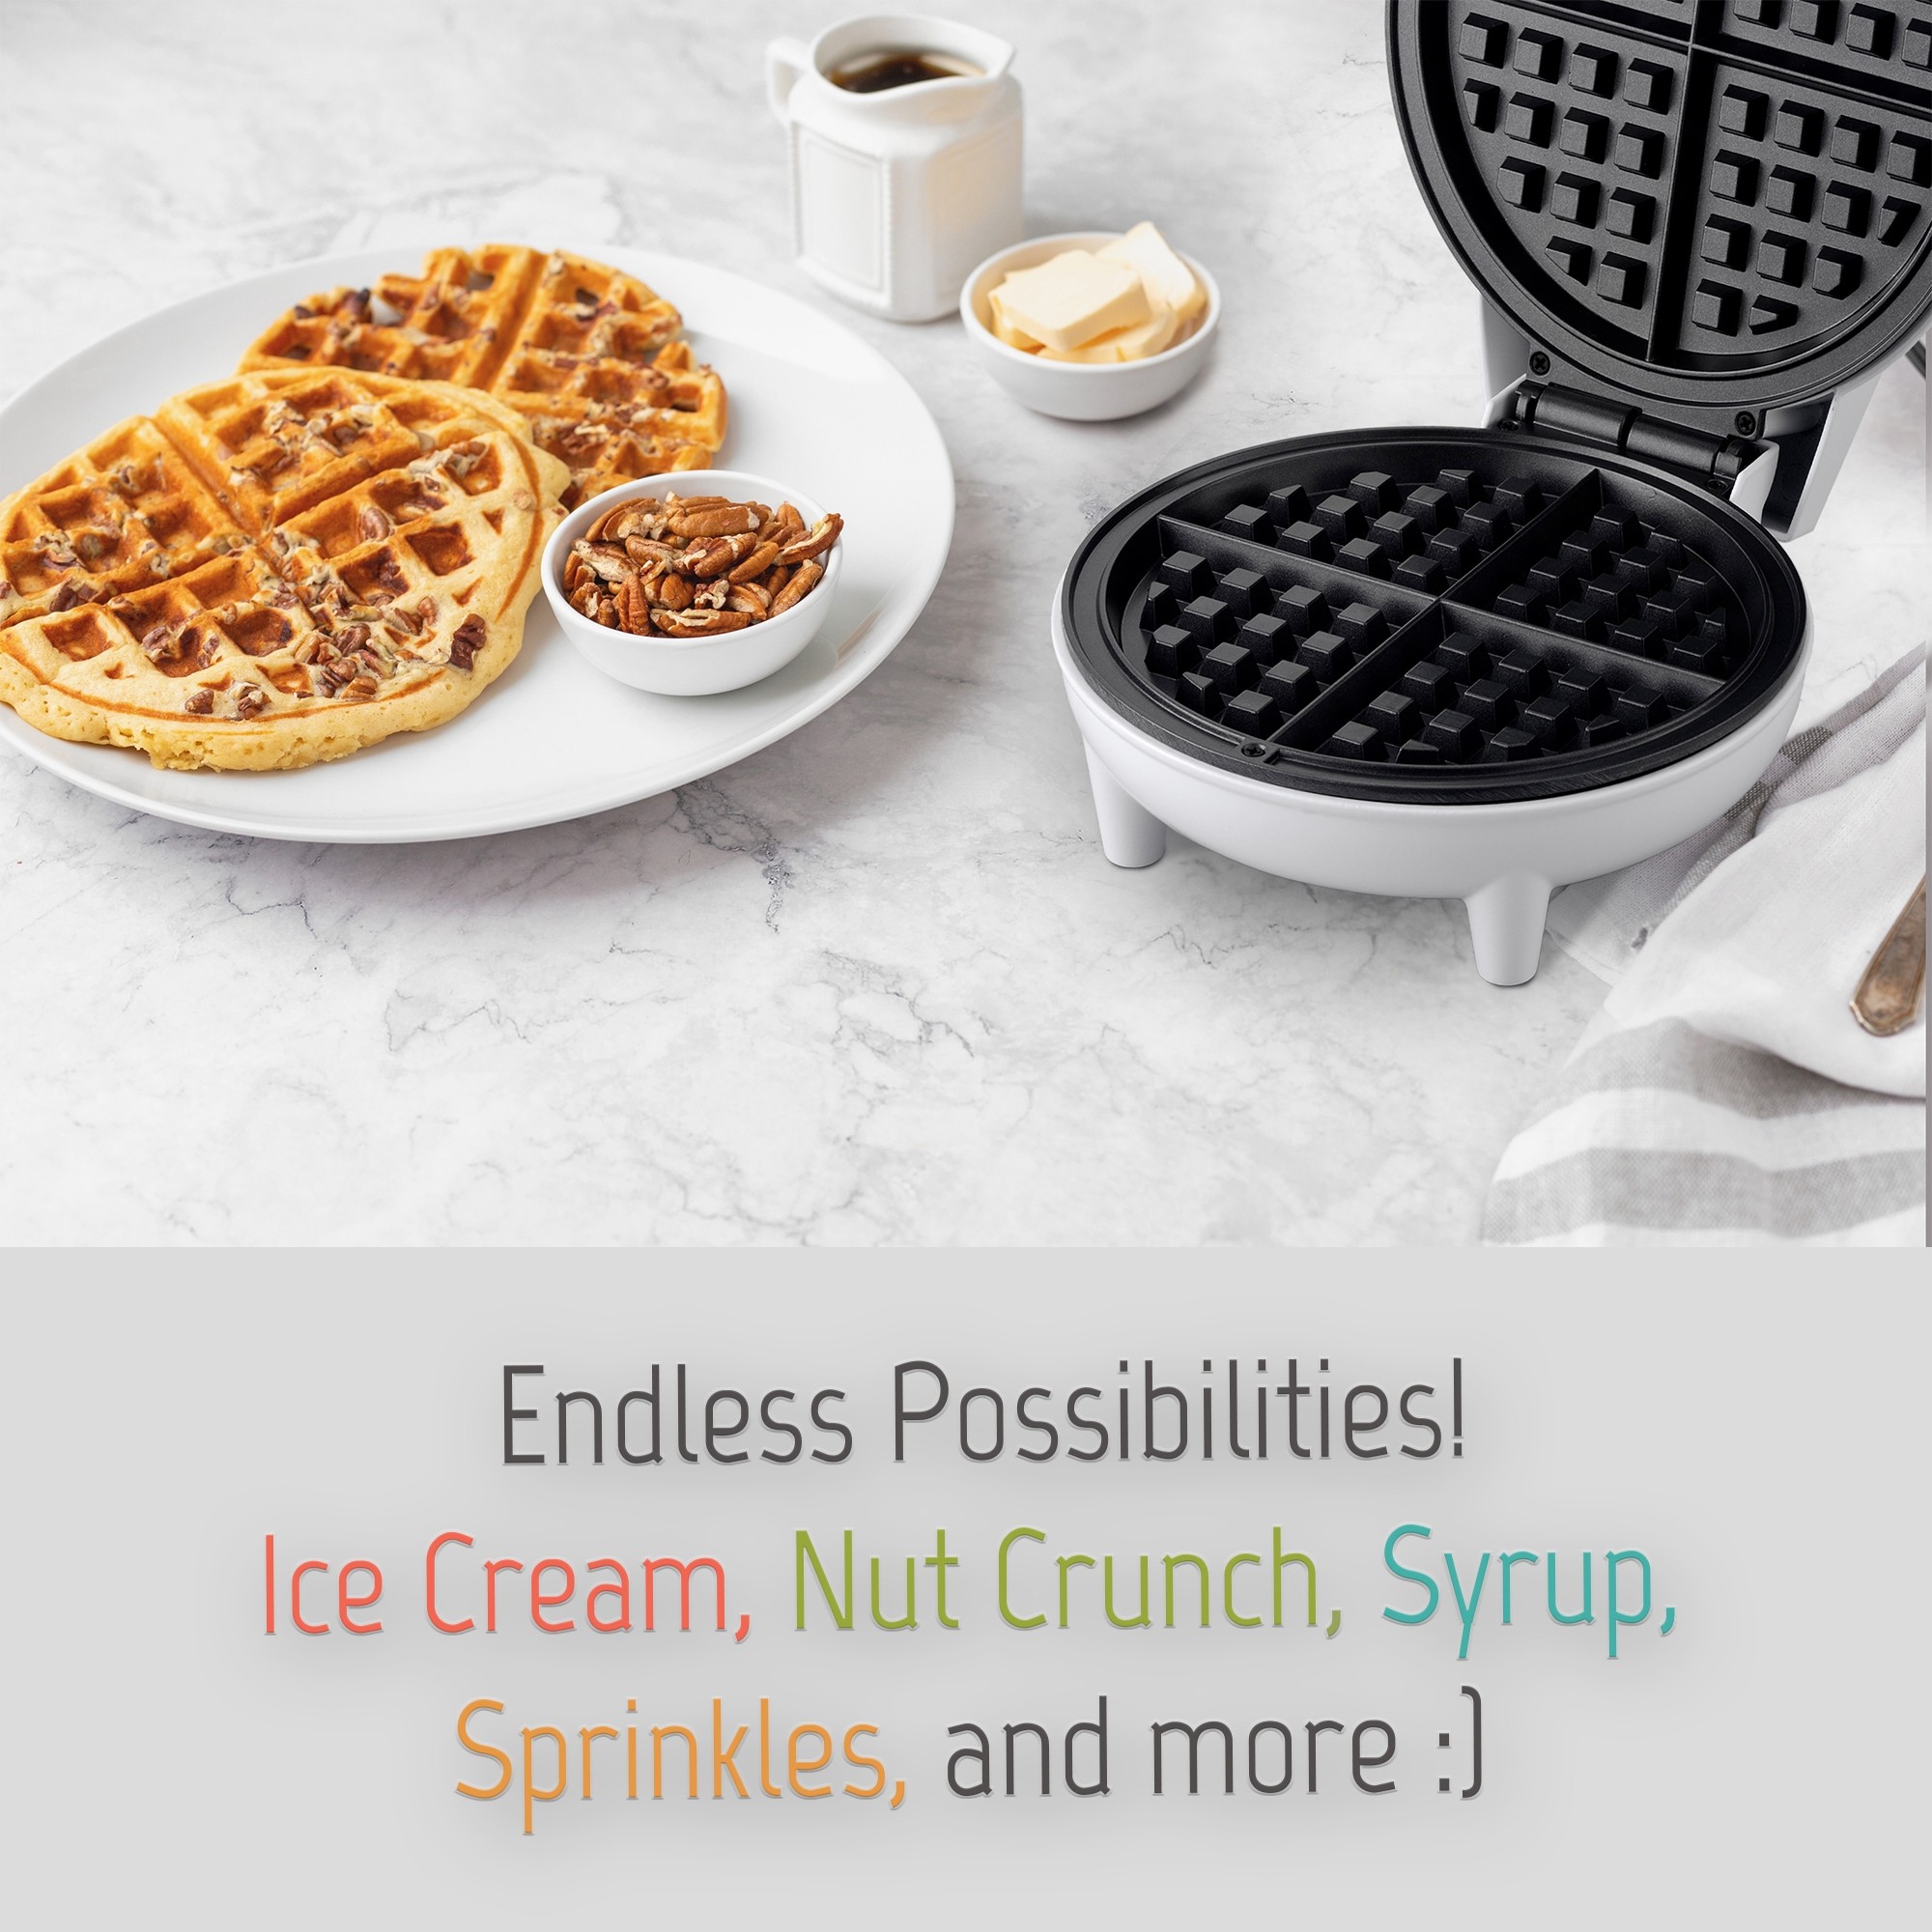 So, About That Death Star Waffle Maker (A Review)